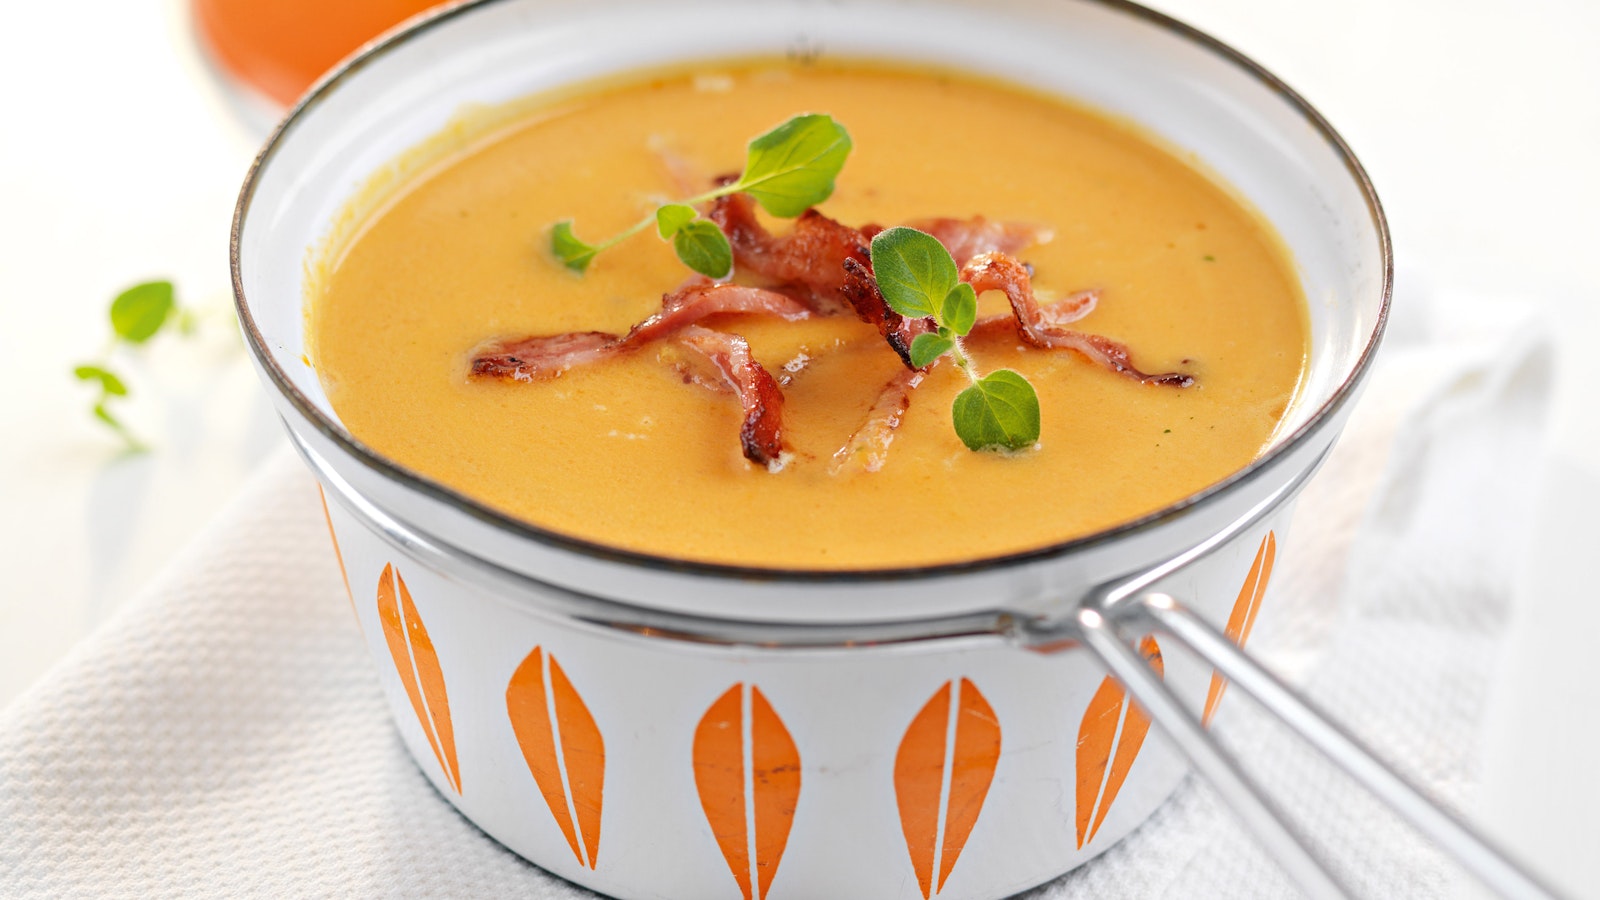 Suppe med søtpotet & bacon